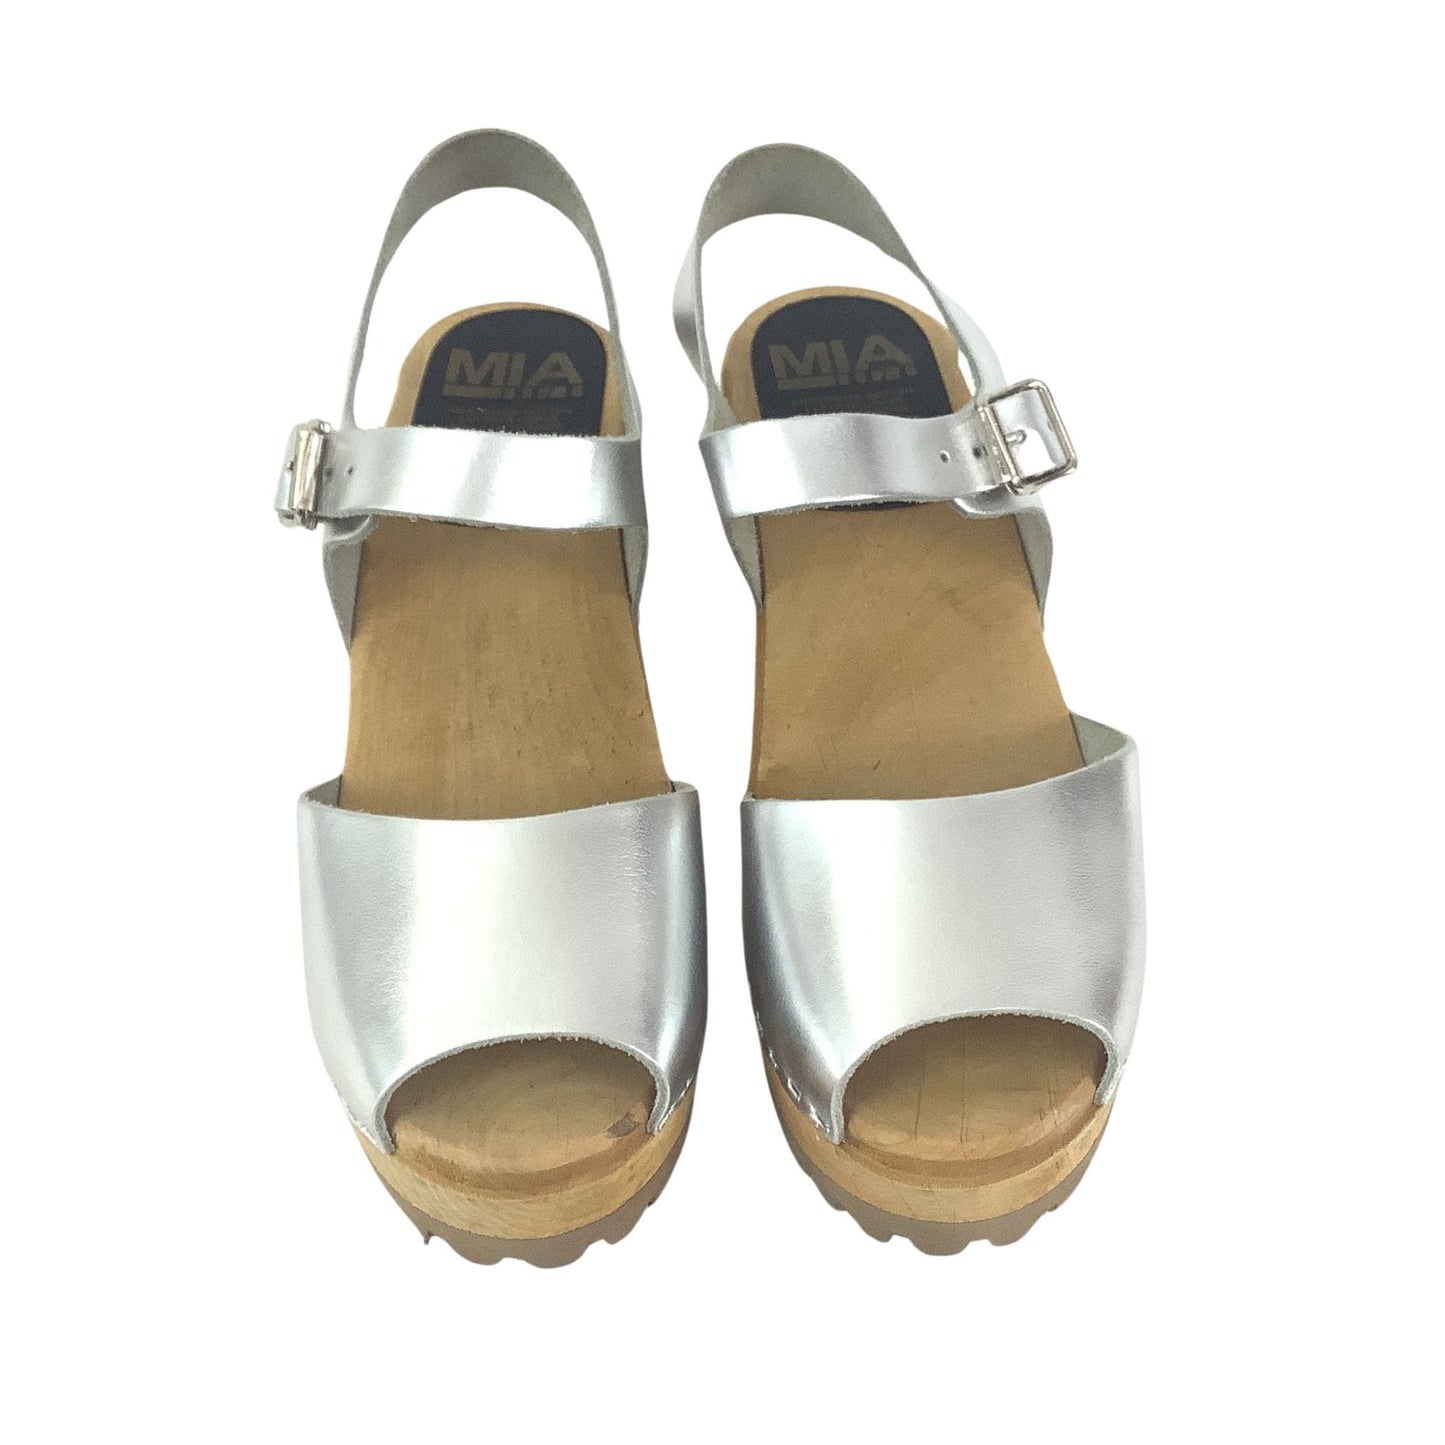 Chunky Metallic Sandals 9 / Silver / Y2K - Now